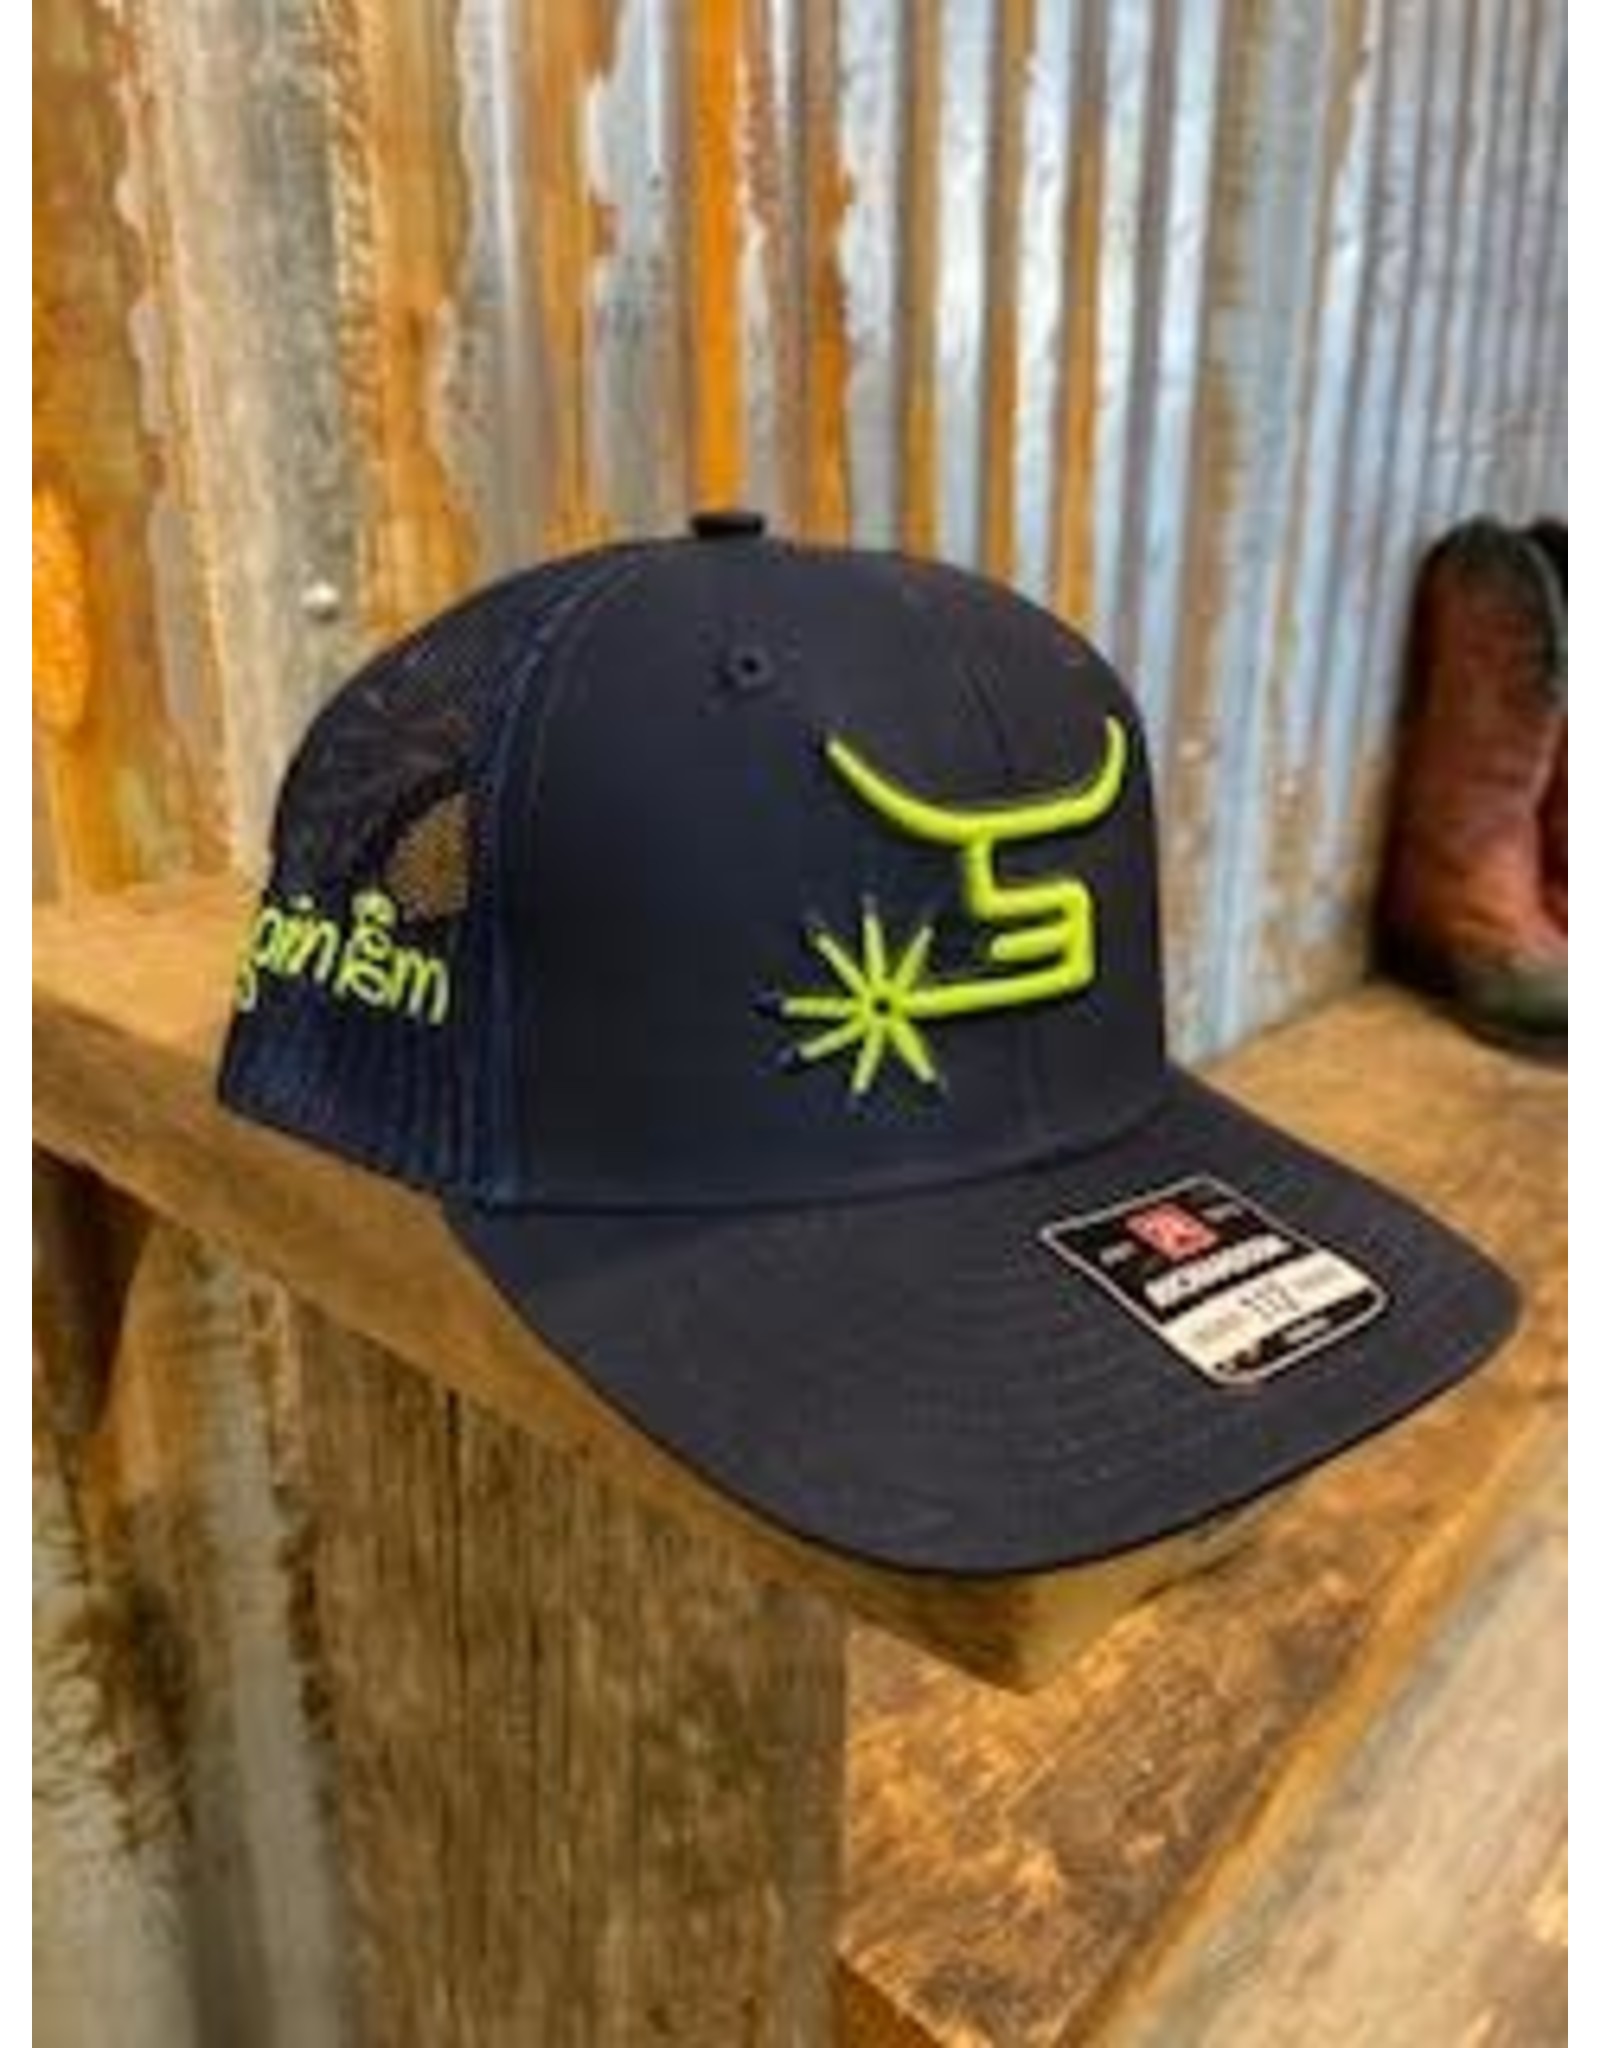 Spin Em "Mutton" Youth Navy/Neon Yellow Snapback Cap